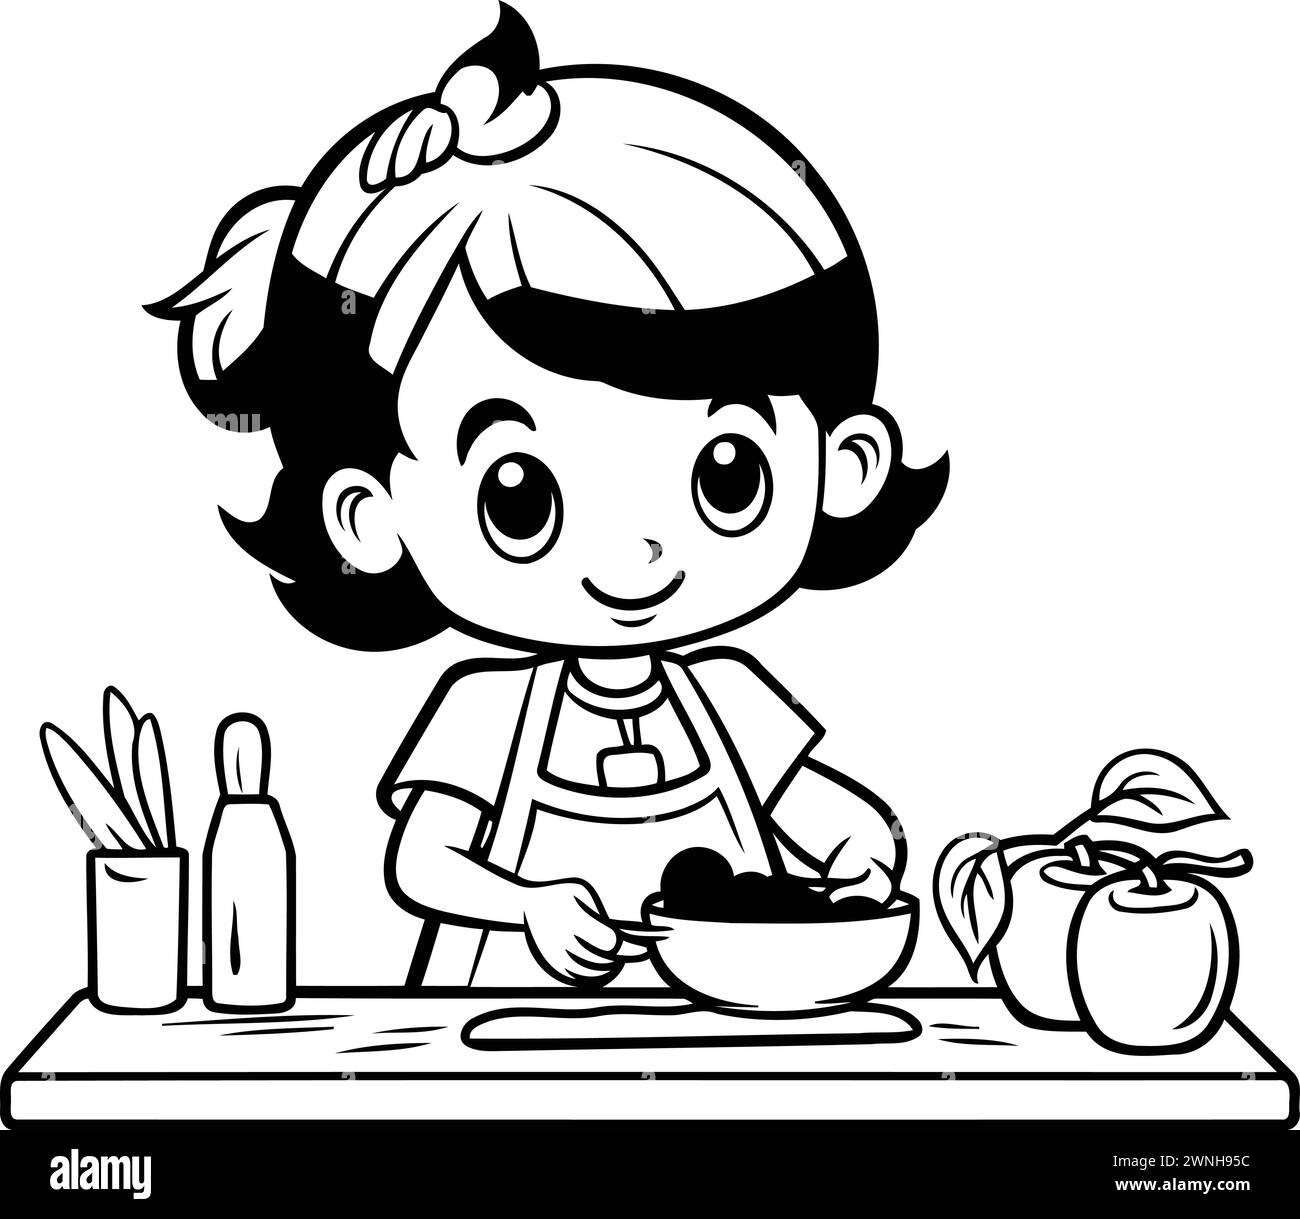 Black and White Cartoon Illustration of Cute Little Girl Cooking Healthy Food for Coloring Book Stock Vector